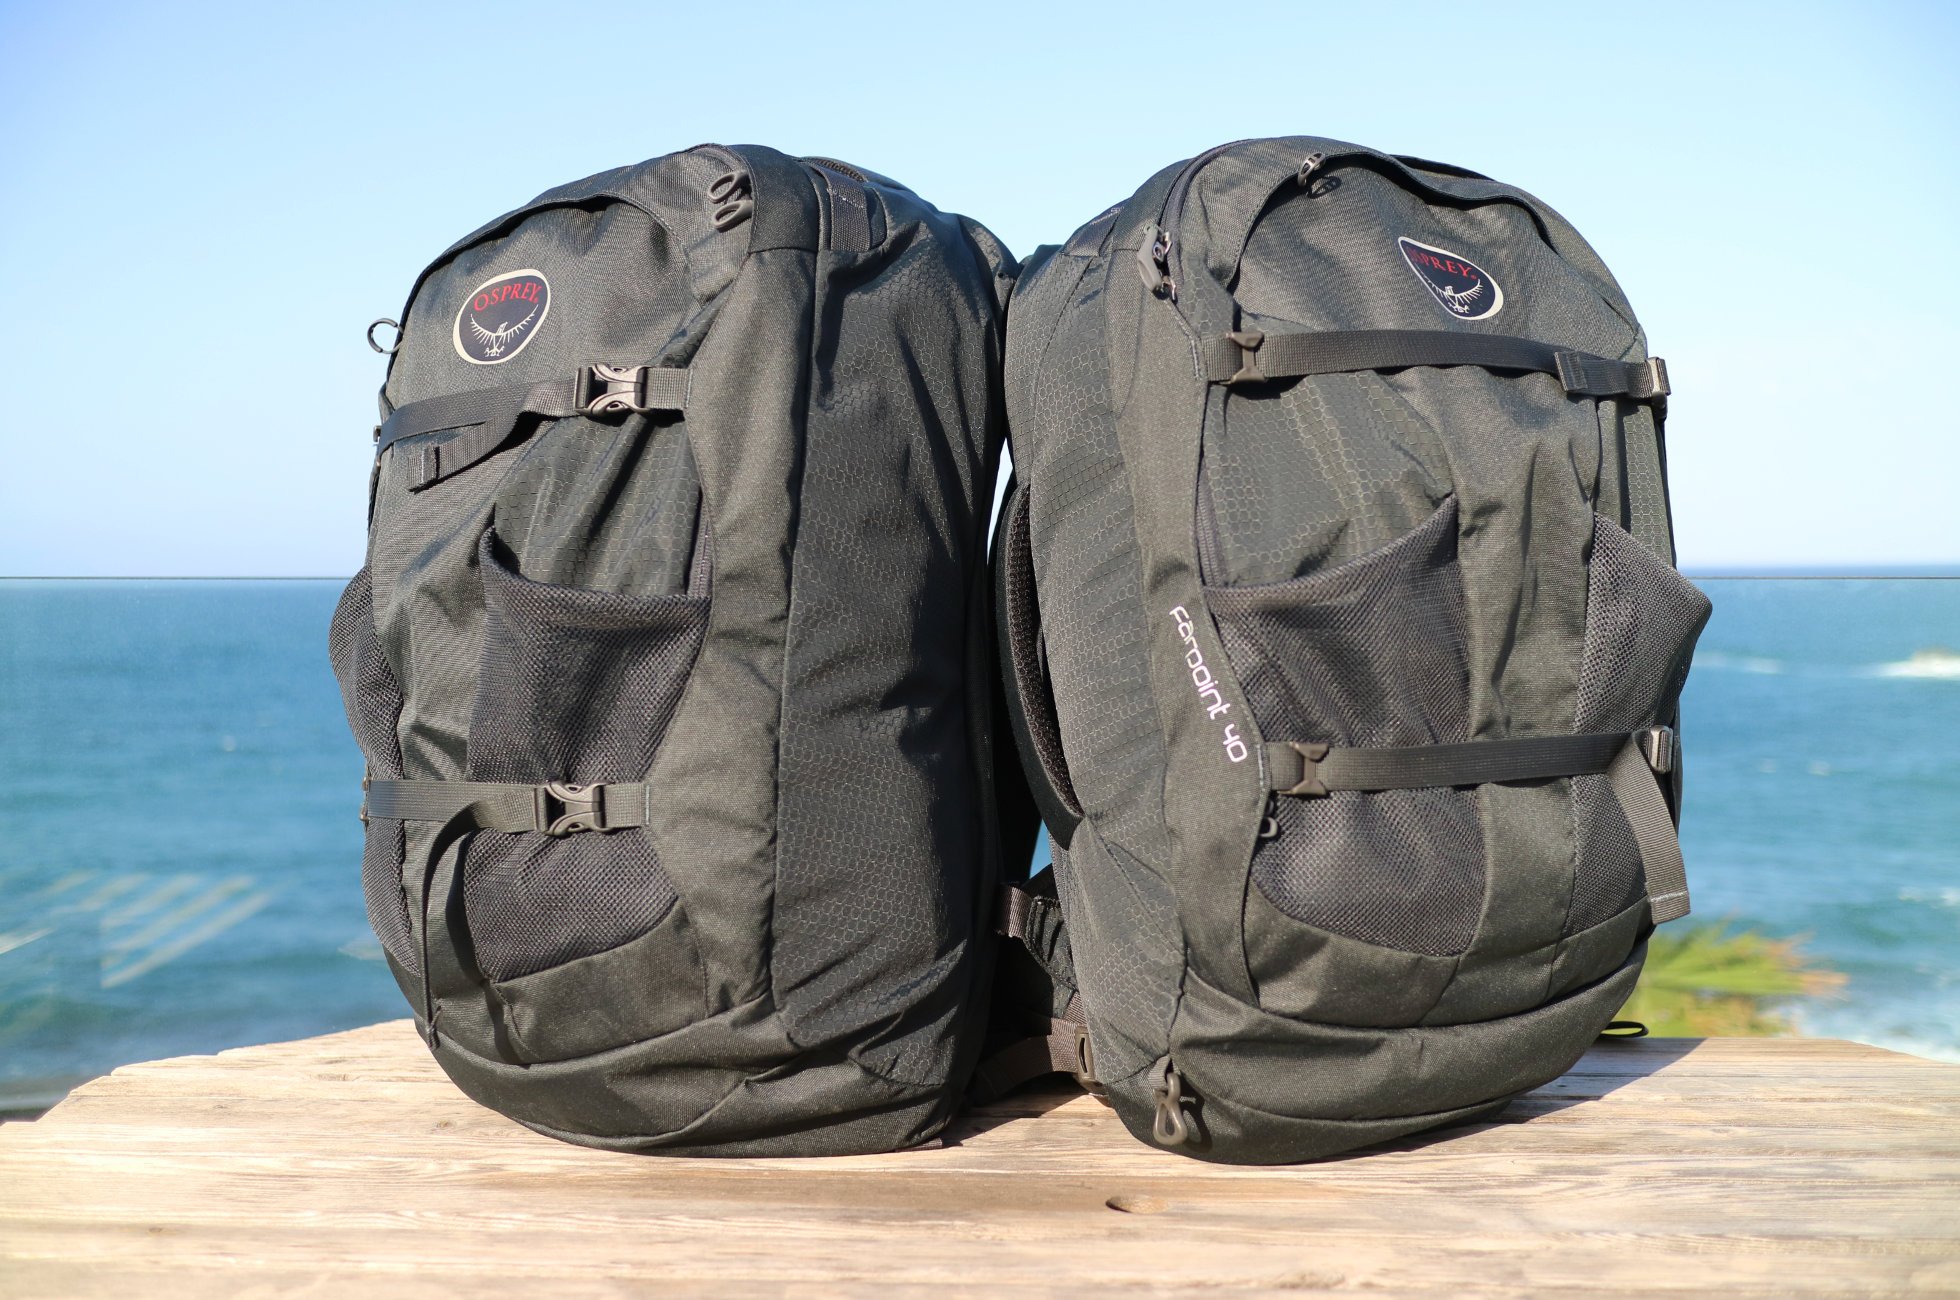 Osprey Farpoint 40 - the lightweight backpack for all adventurers